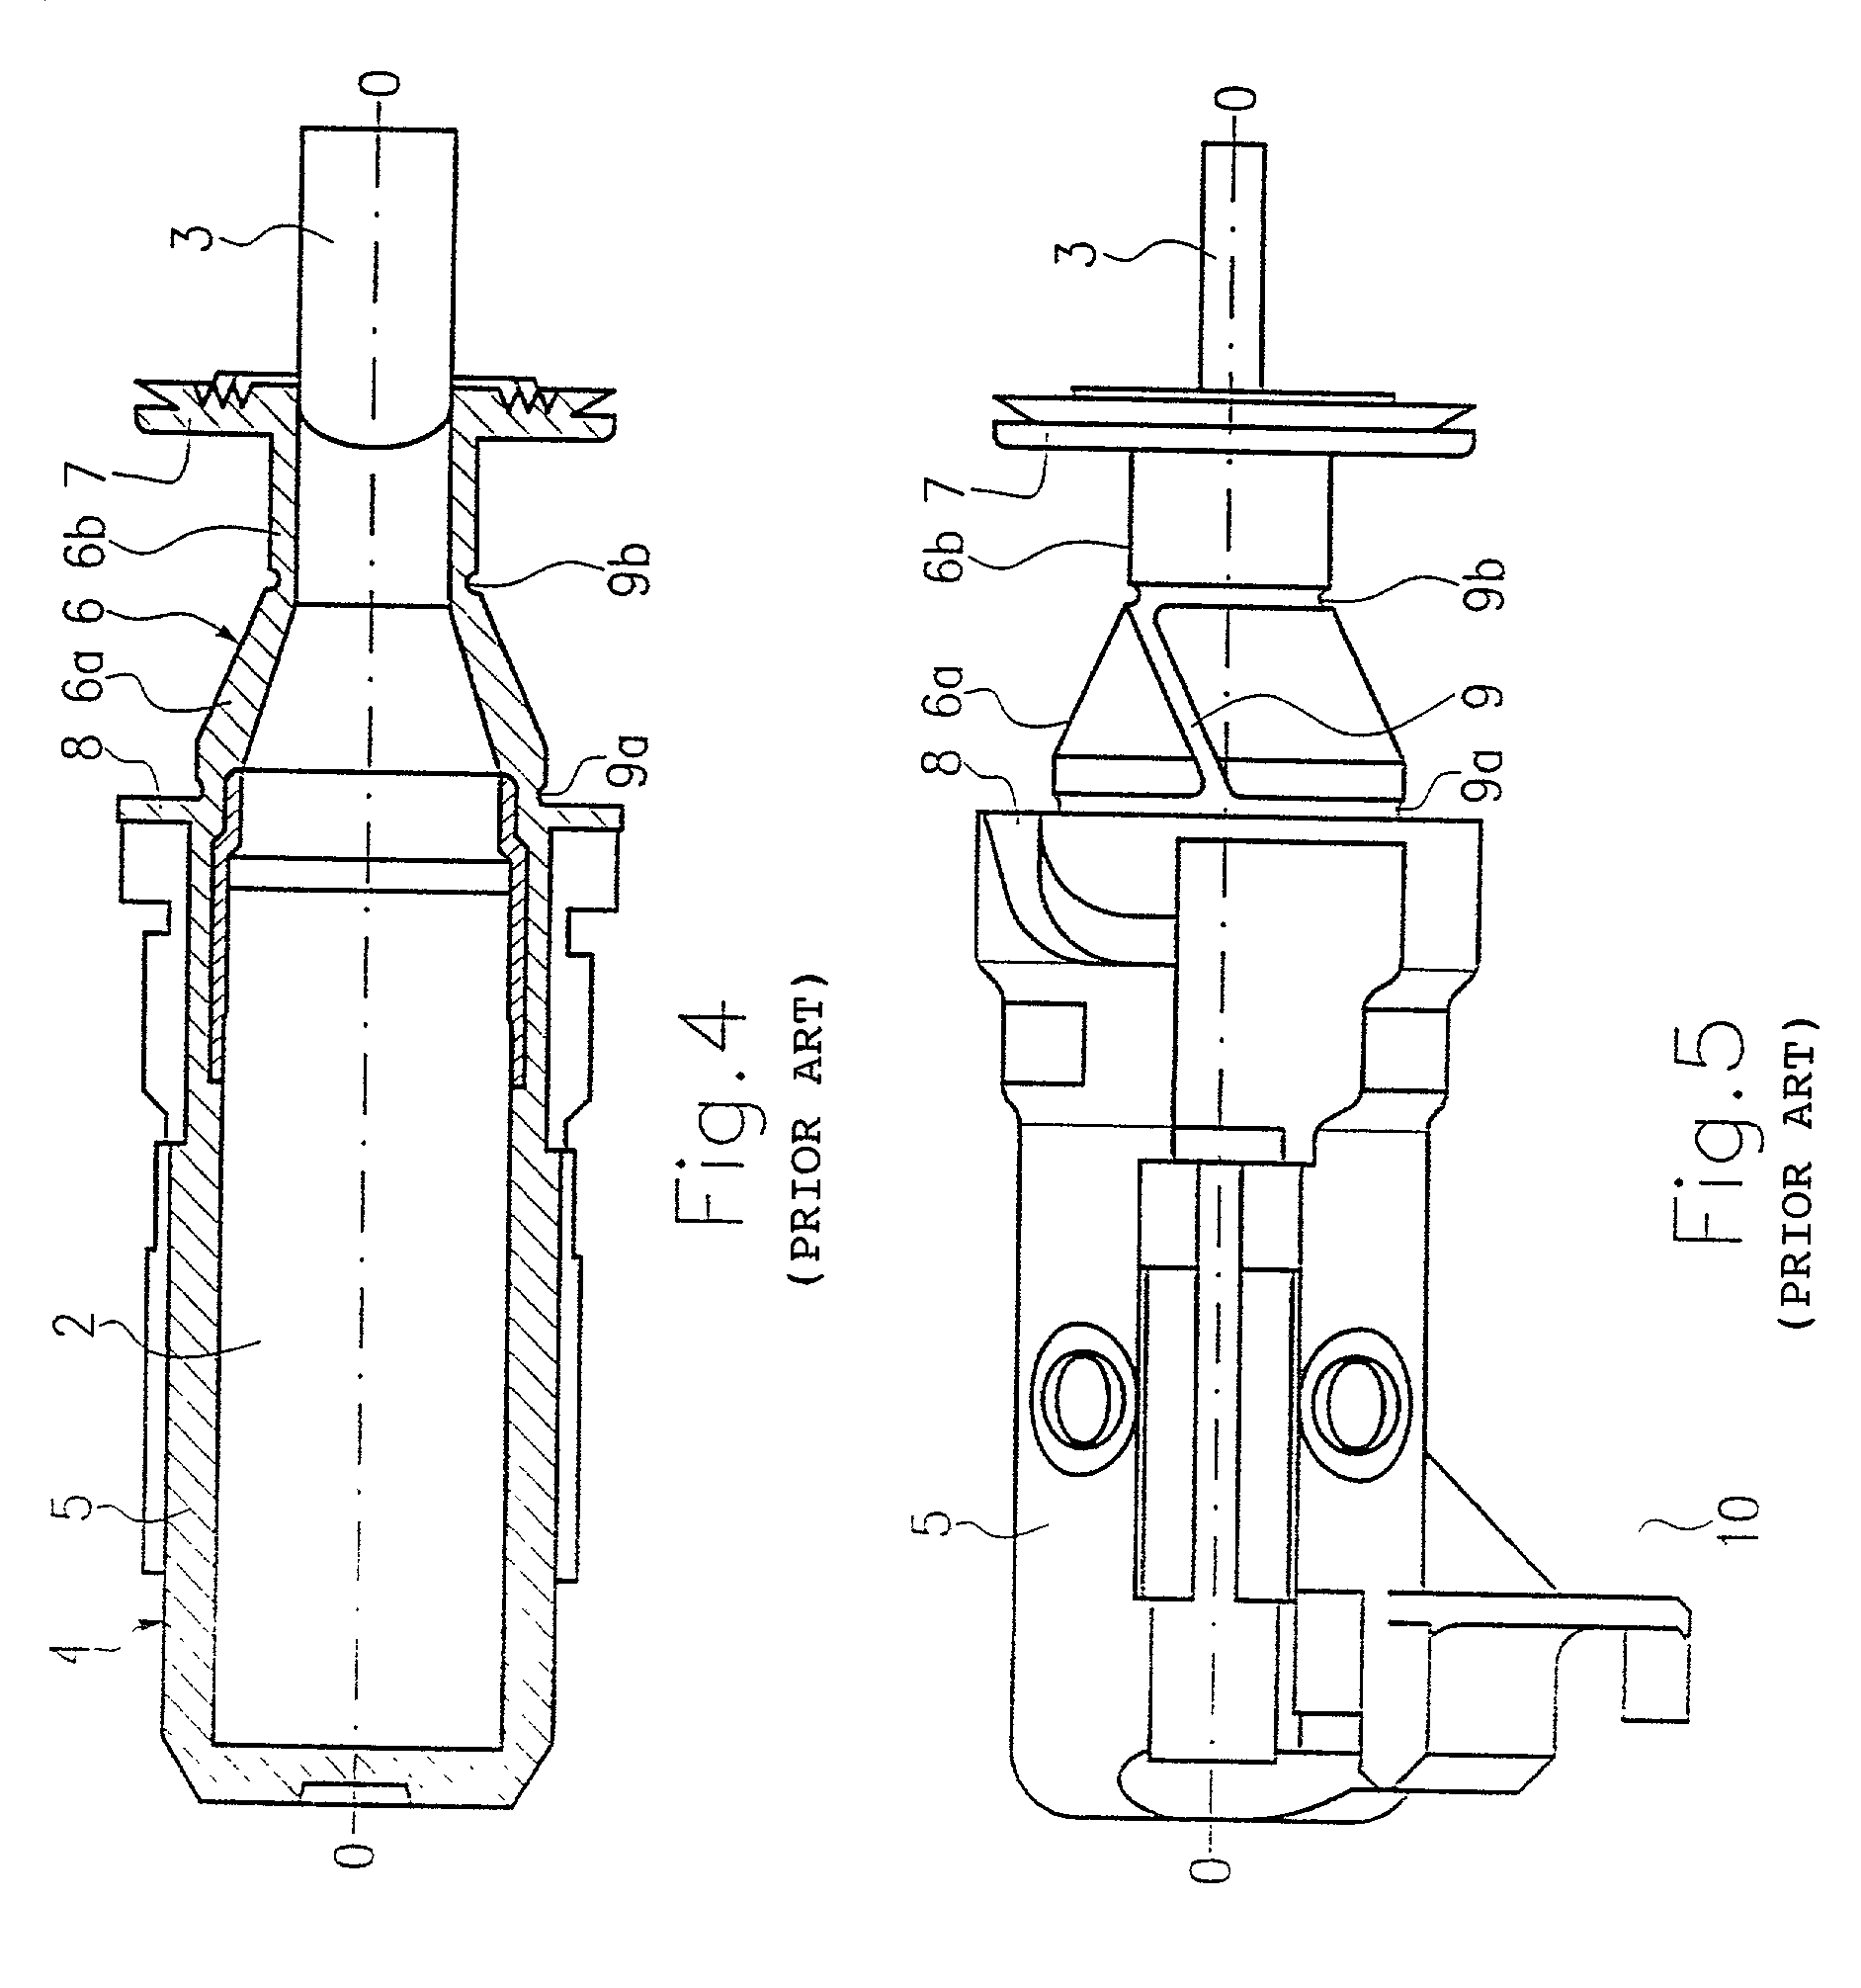 Inductive sensor (speed sensor) with a conical coil base body